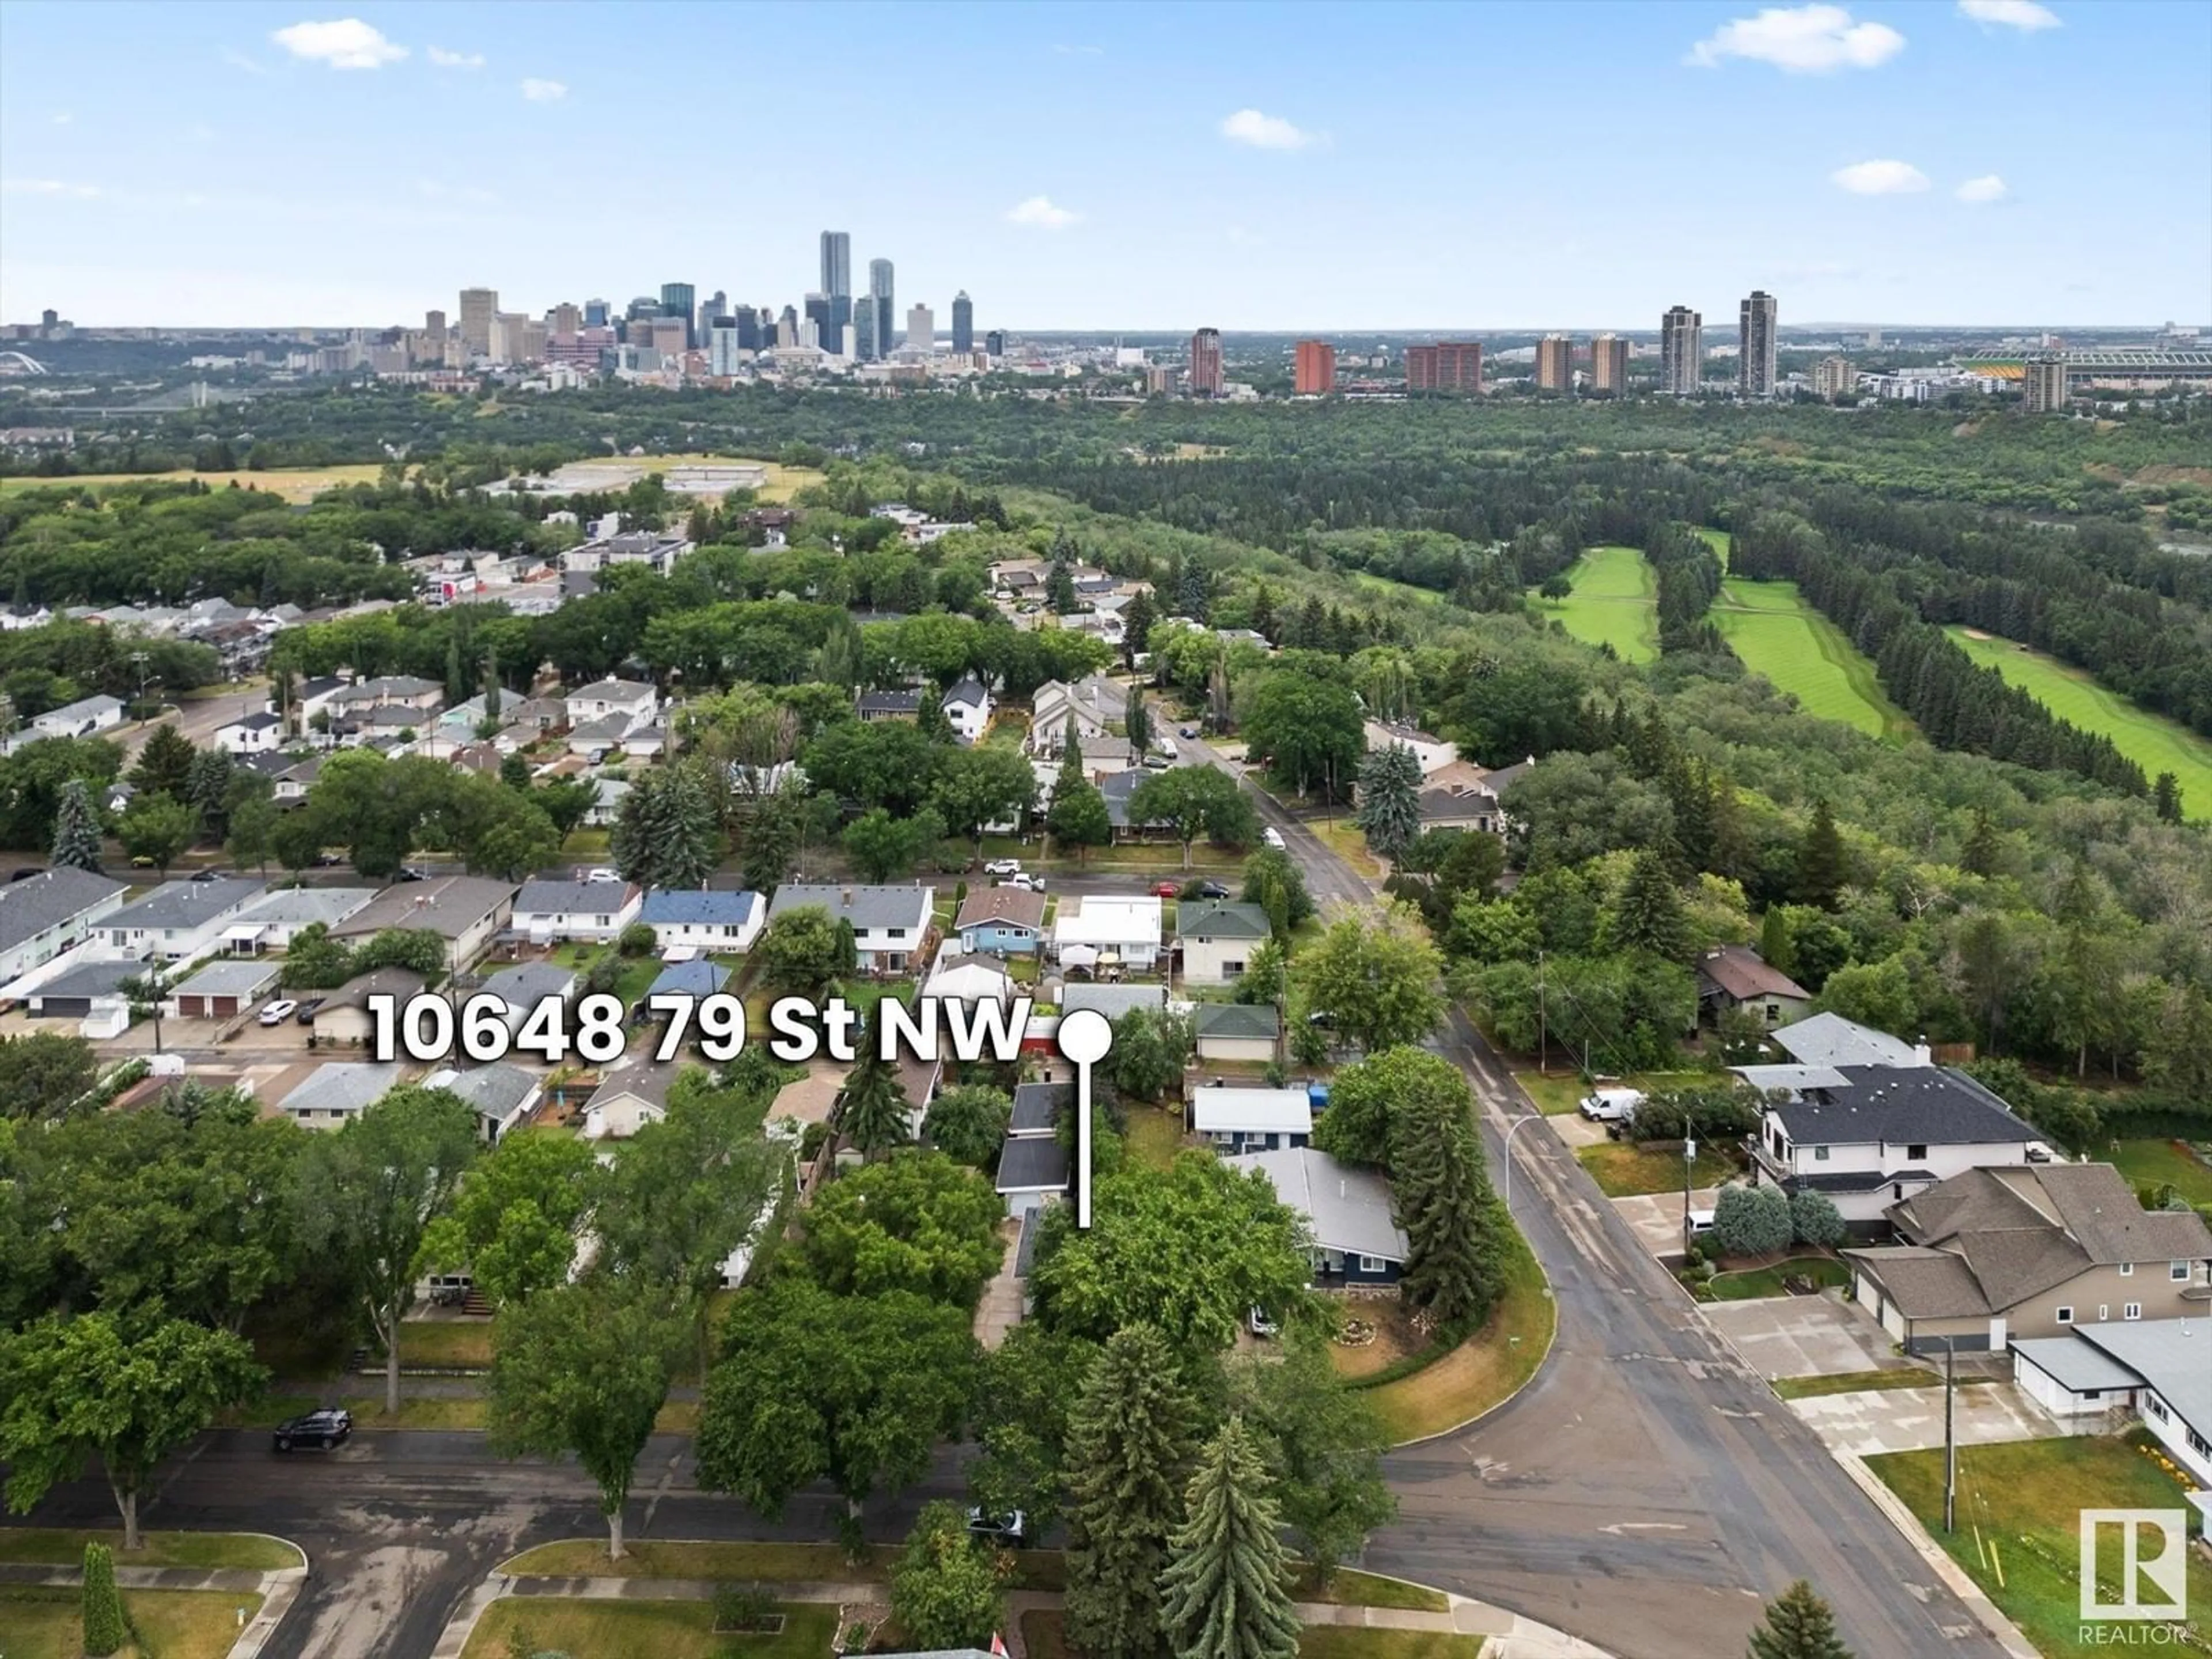 Lakeview for 10648 79 ST NW, Edmonton Alberta T6A3H4